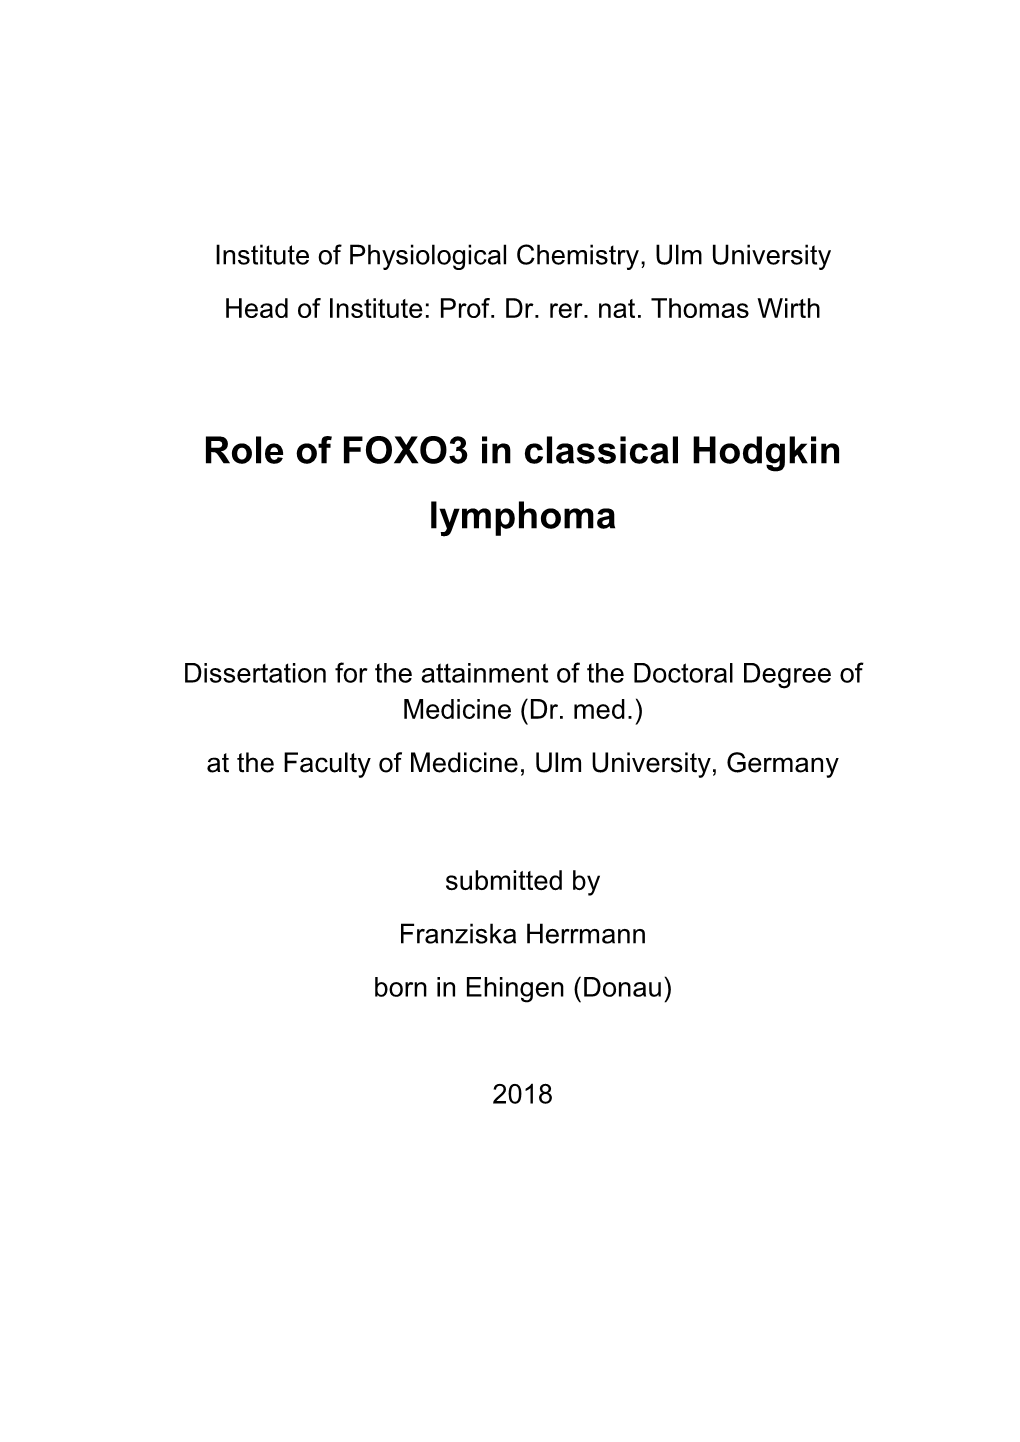 Role of FOXO3 in Classical Hodgkin Lymphoma